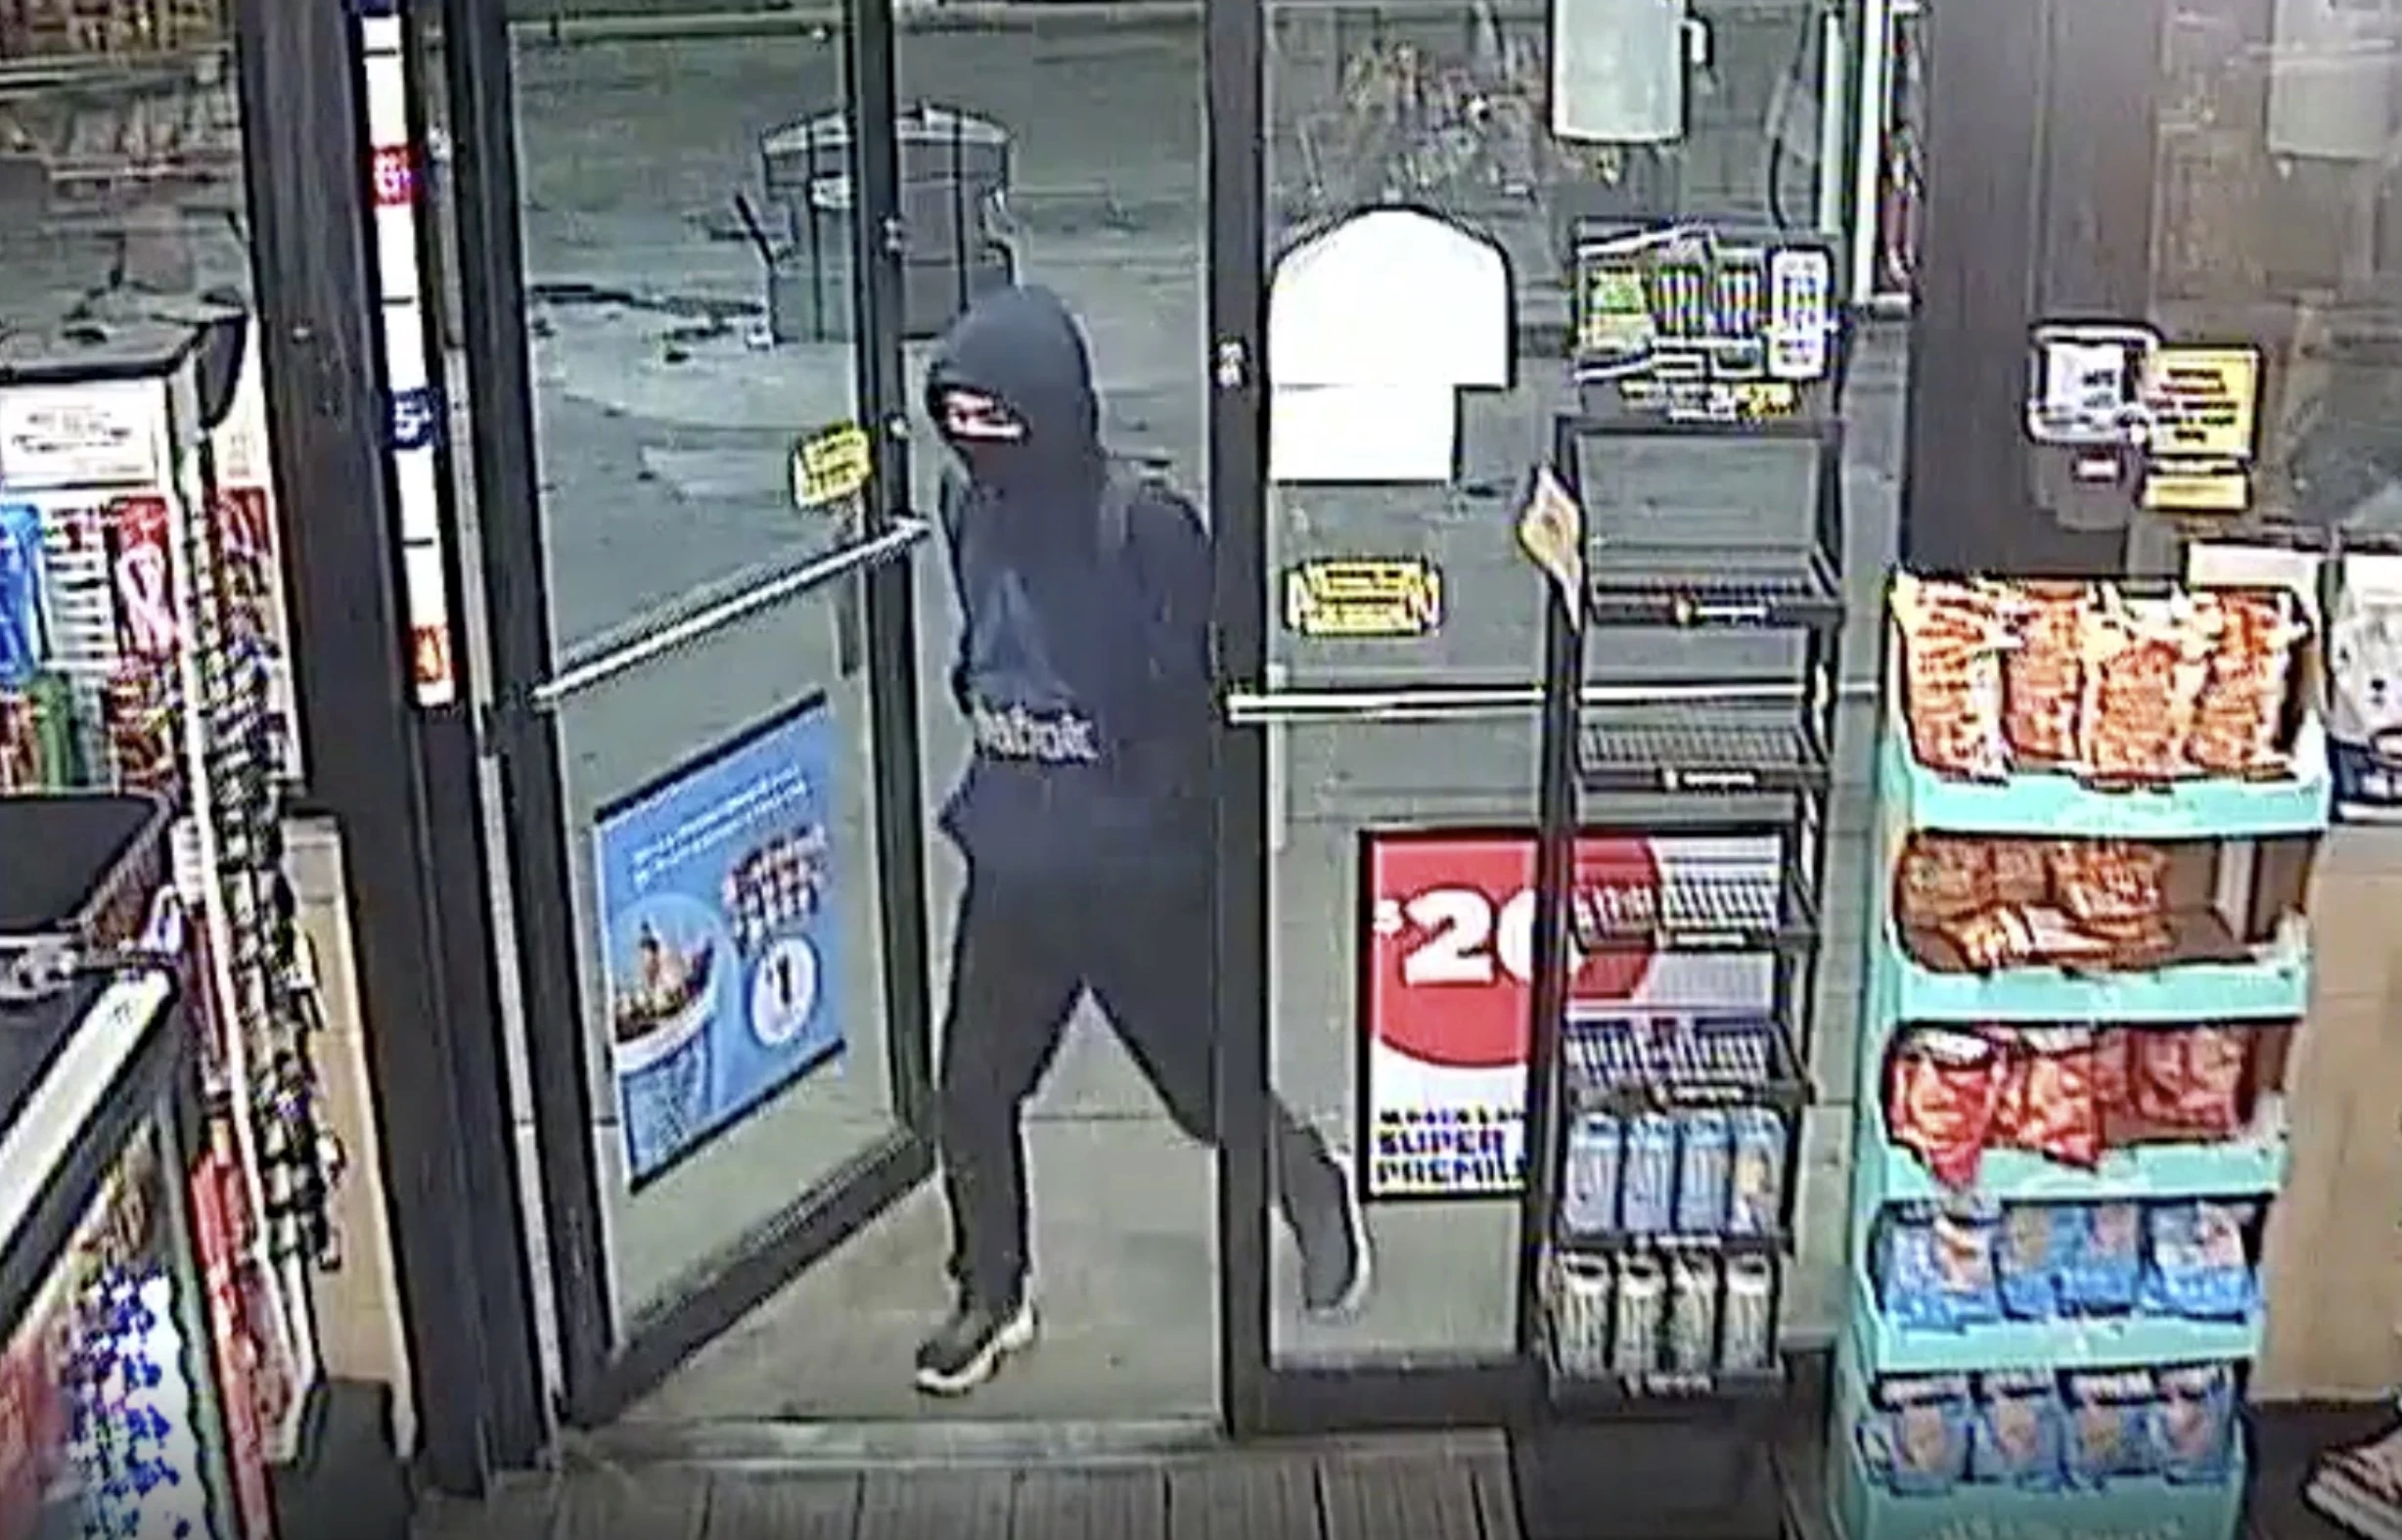 Search underway for armed robbery suspect at Portage gas station